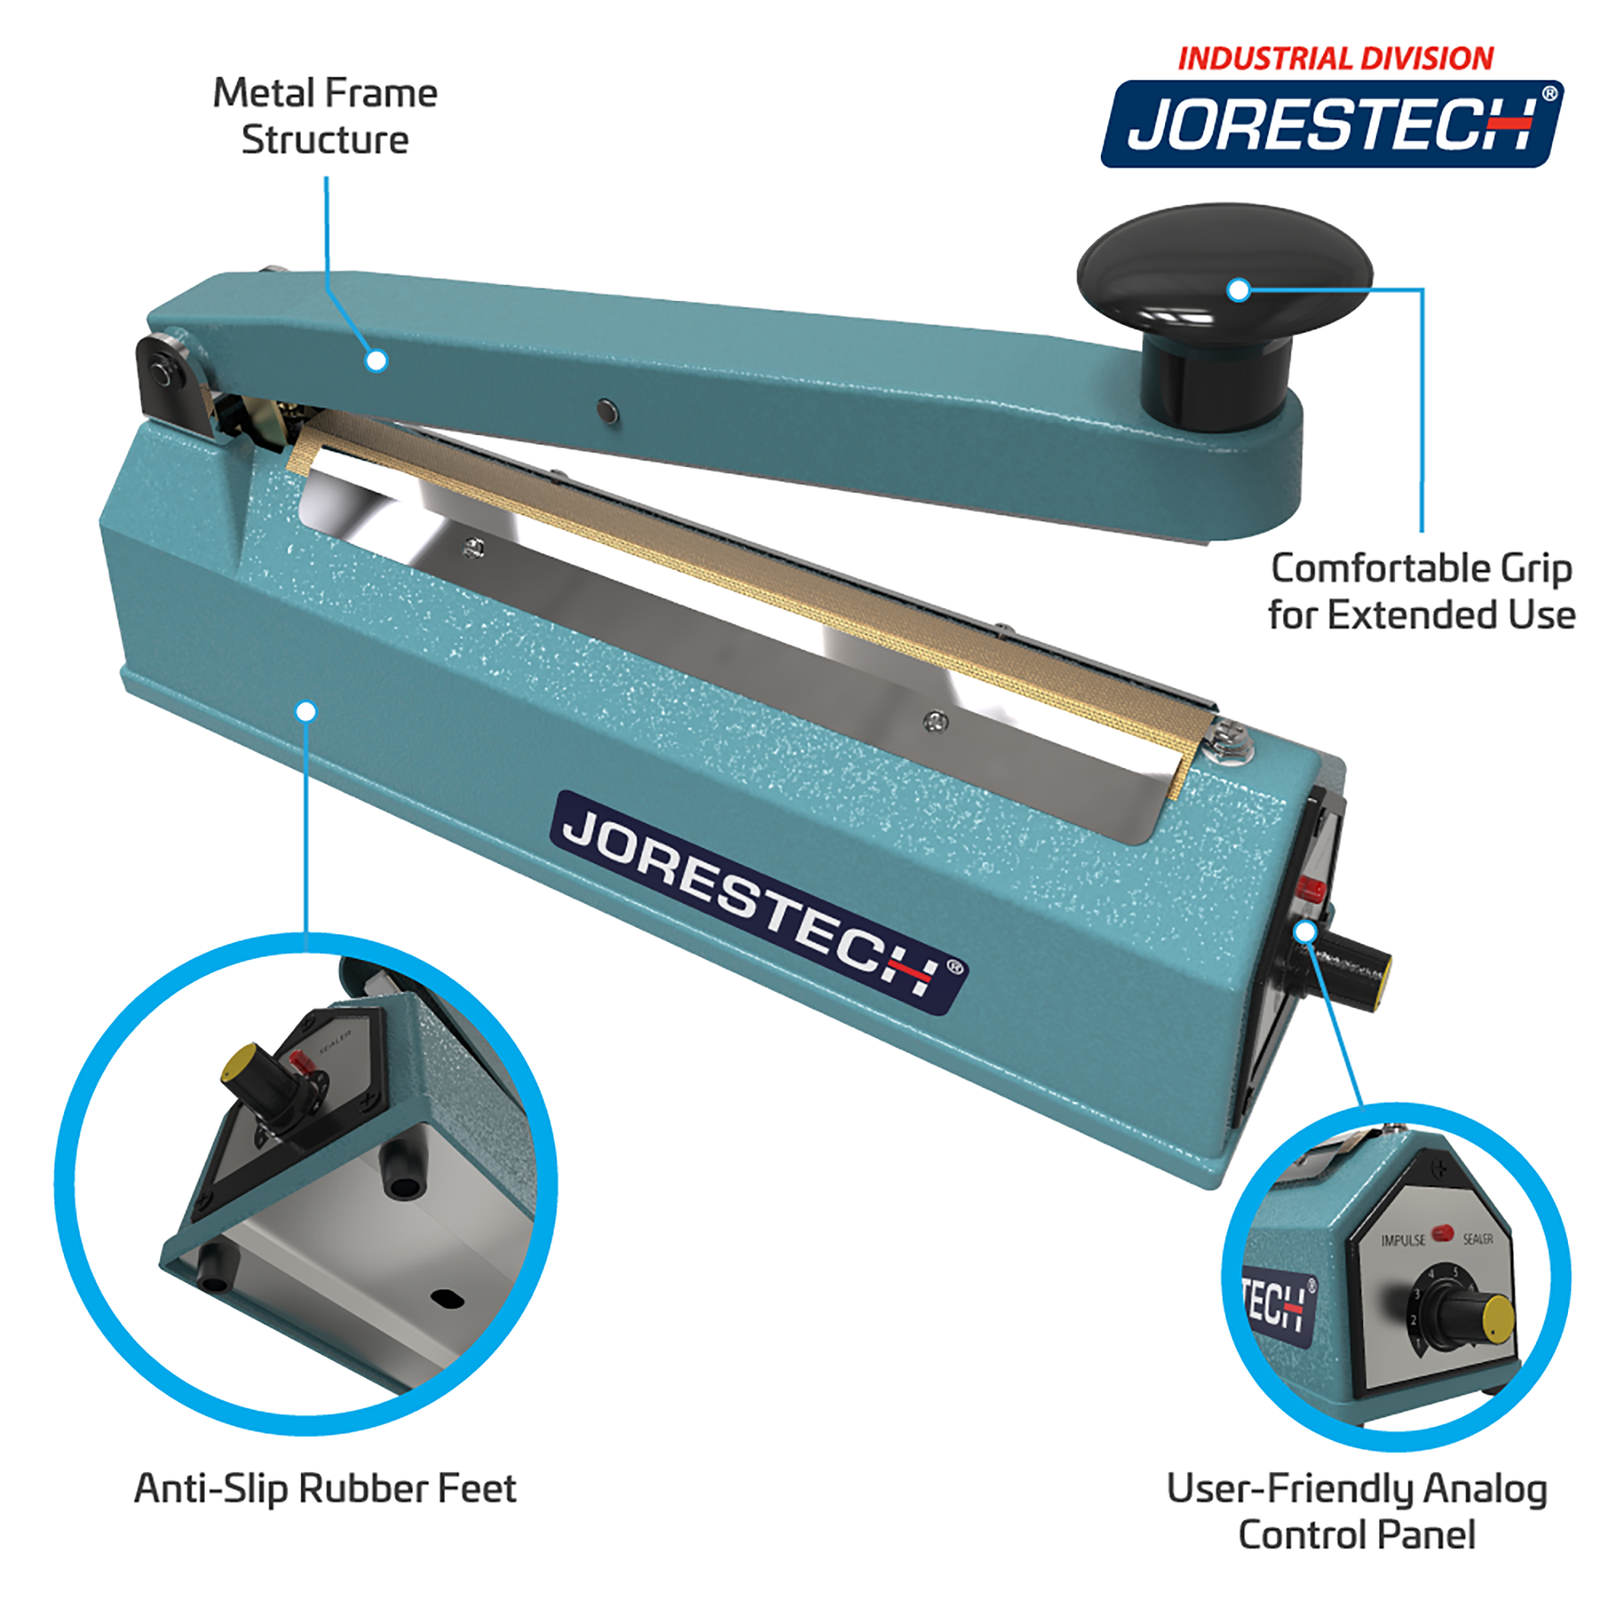 The 8 inch manual impulse sealer. Features include, Metal Frame Structure, Comfortable Grip for Extended Use, Anti-slip Rubber Feet, and User Friendly Analog Control Panel. Zoom in close-ups of rubber feet and control panel.